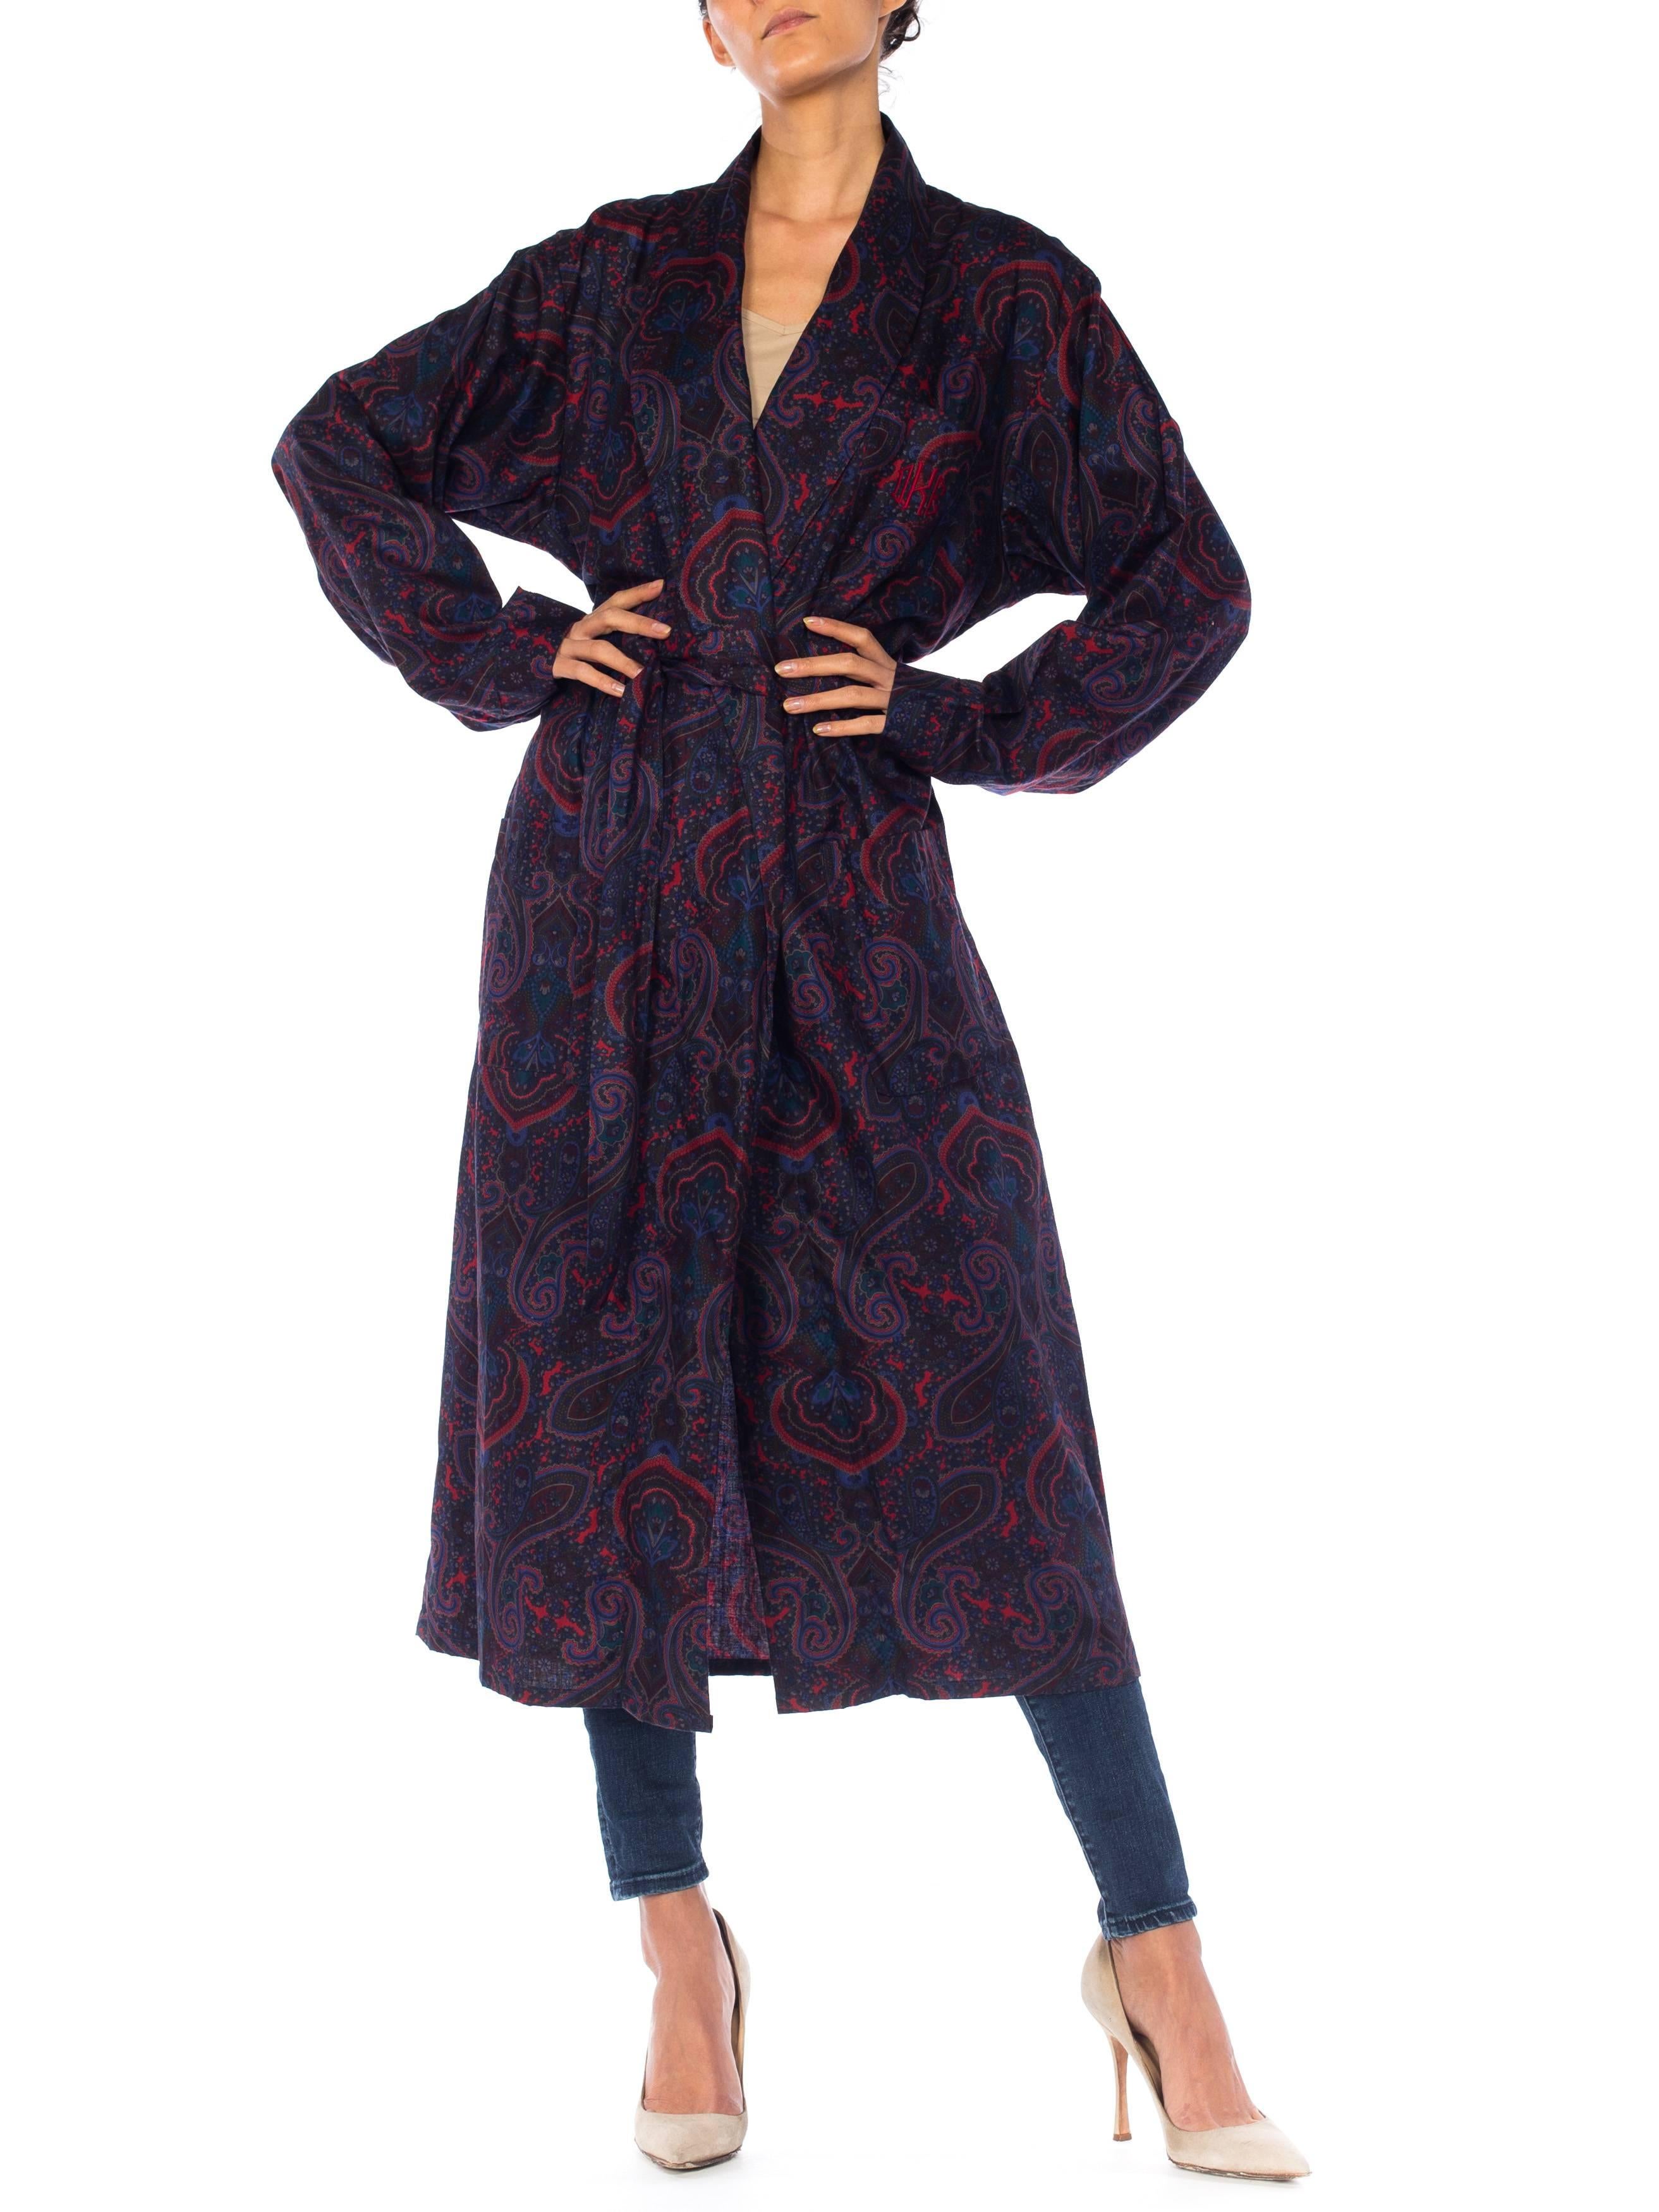 Silk cotton Paisley Print Robe  from Neiman Marcus perfect from a Man or Woman.
Monogram initials on front pocket.
